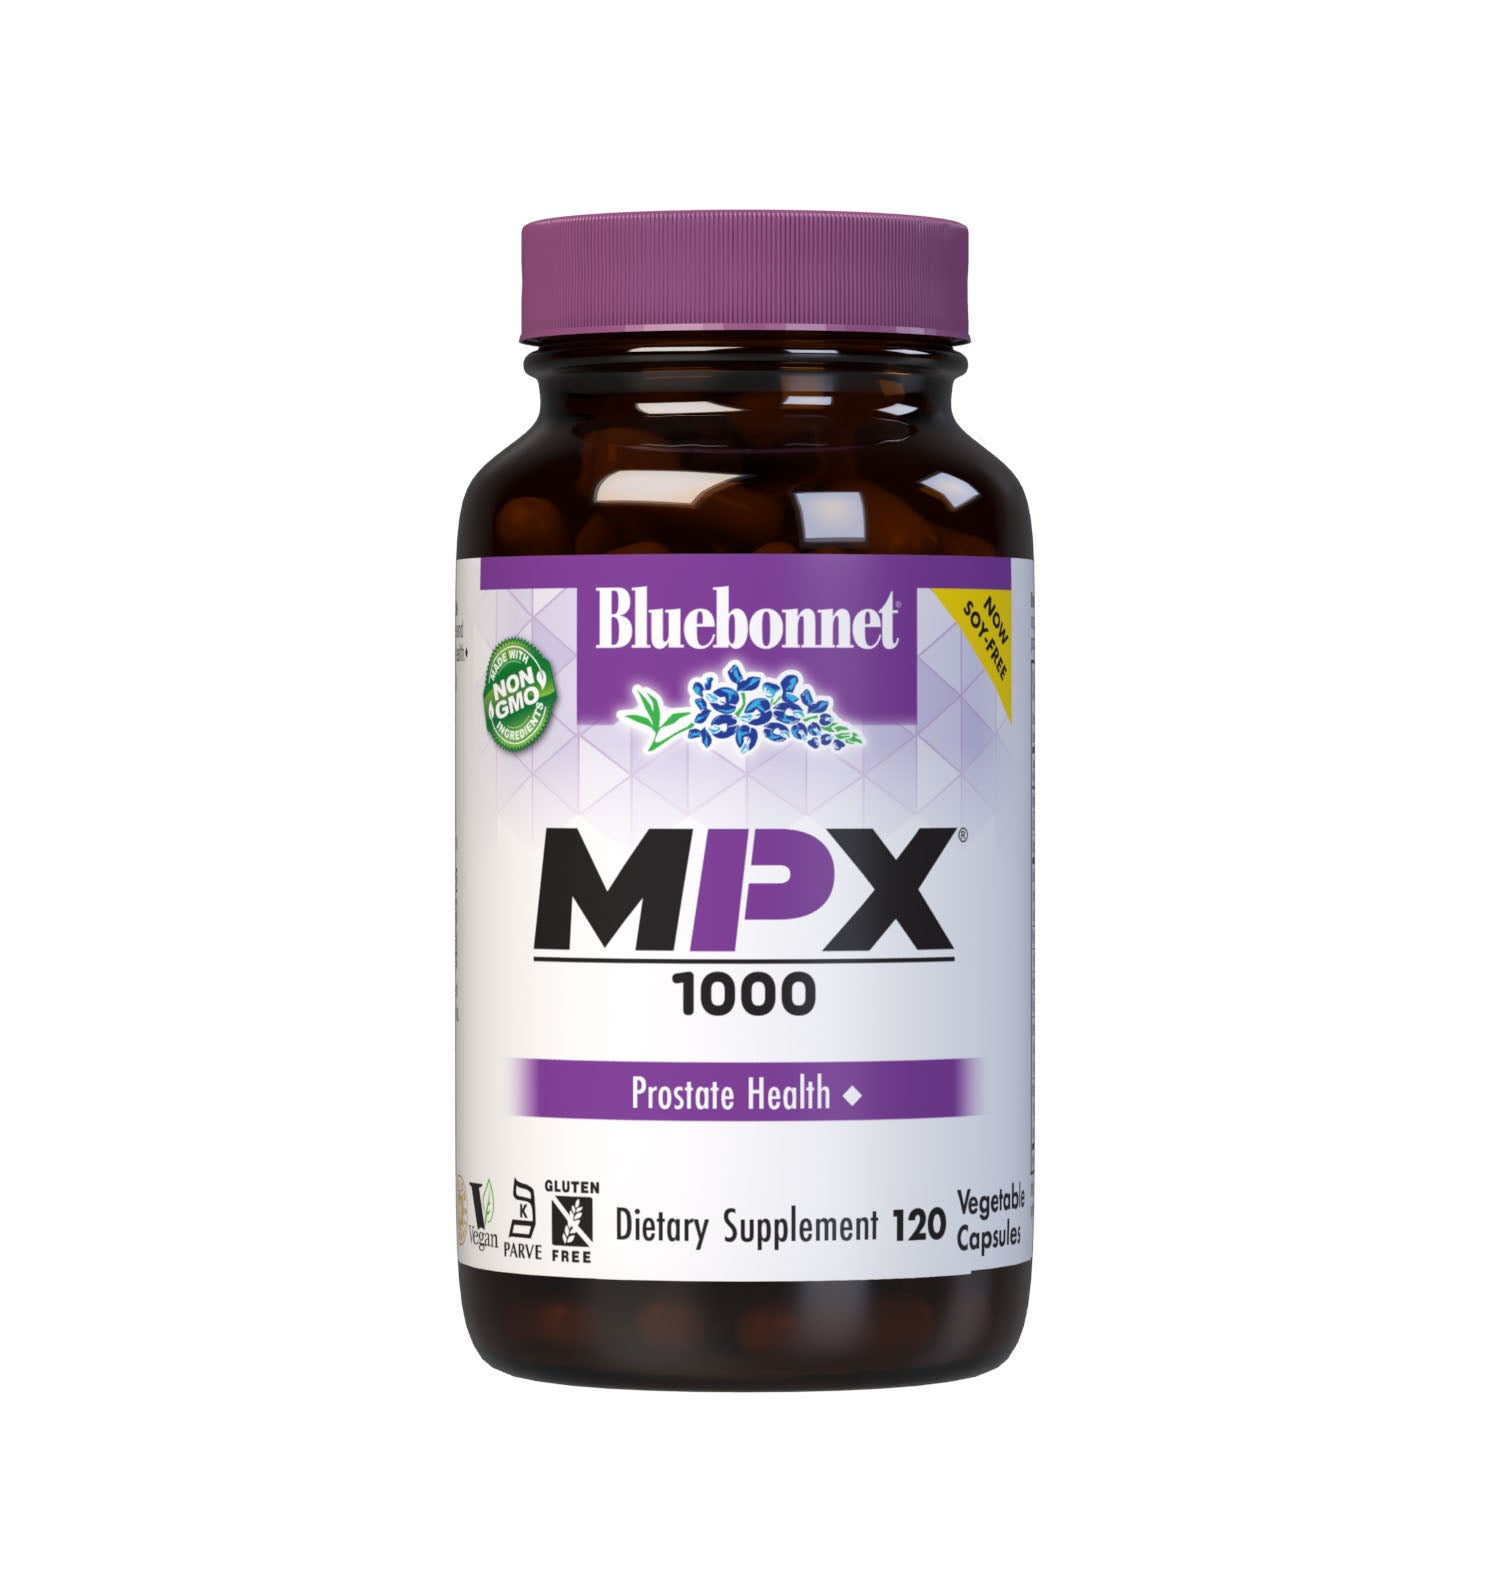 Bluebonnet’s MPX 1000 Prostate Support 120 Vegetable Capsules are scientifically formulated with innovative and complementary nutrients to support men’s prostate health, such as standardized saw palmetto berry, green tea leaf and stinging nettle root extracts, plus beta-sitosterol, pumpkin and flax seed powders with vitamin B6 and the coveted 10:1 ratio of zinc and copper in more bioavailable amino acid chelate forms.  #size_120 count